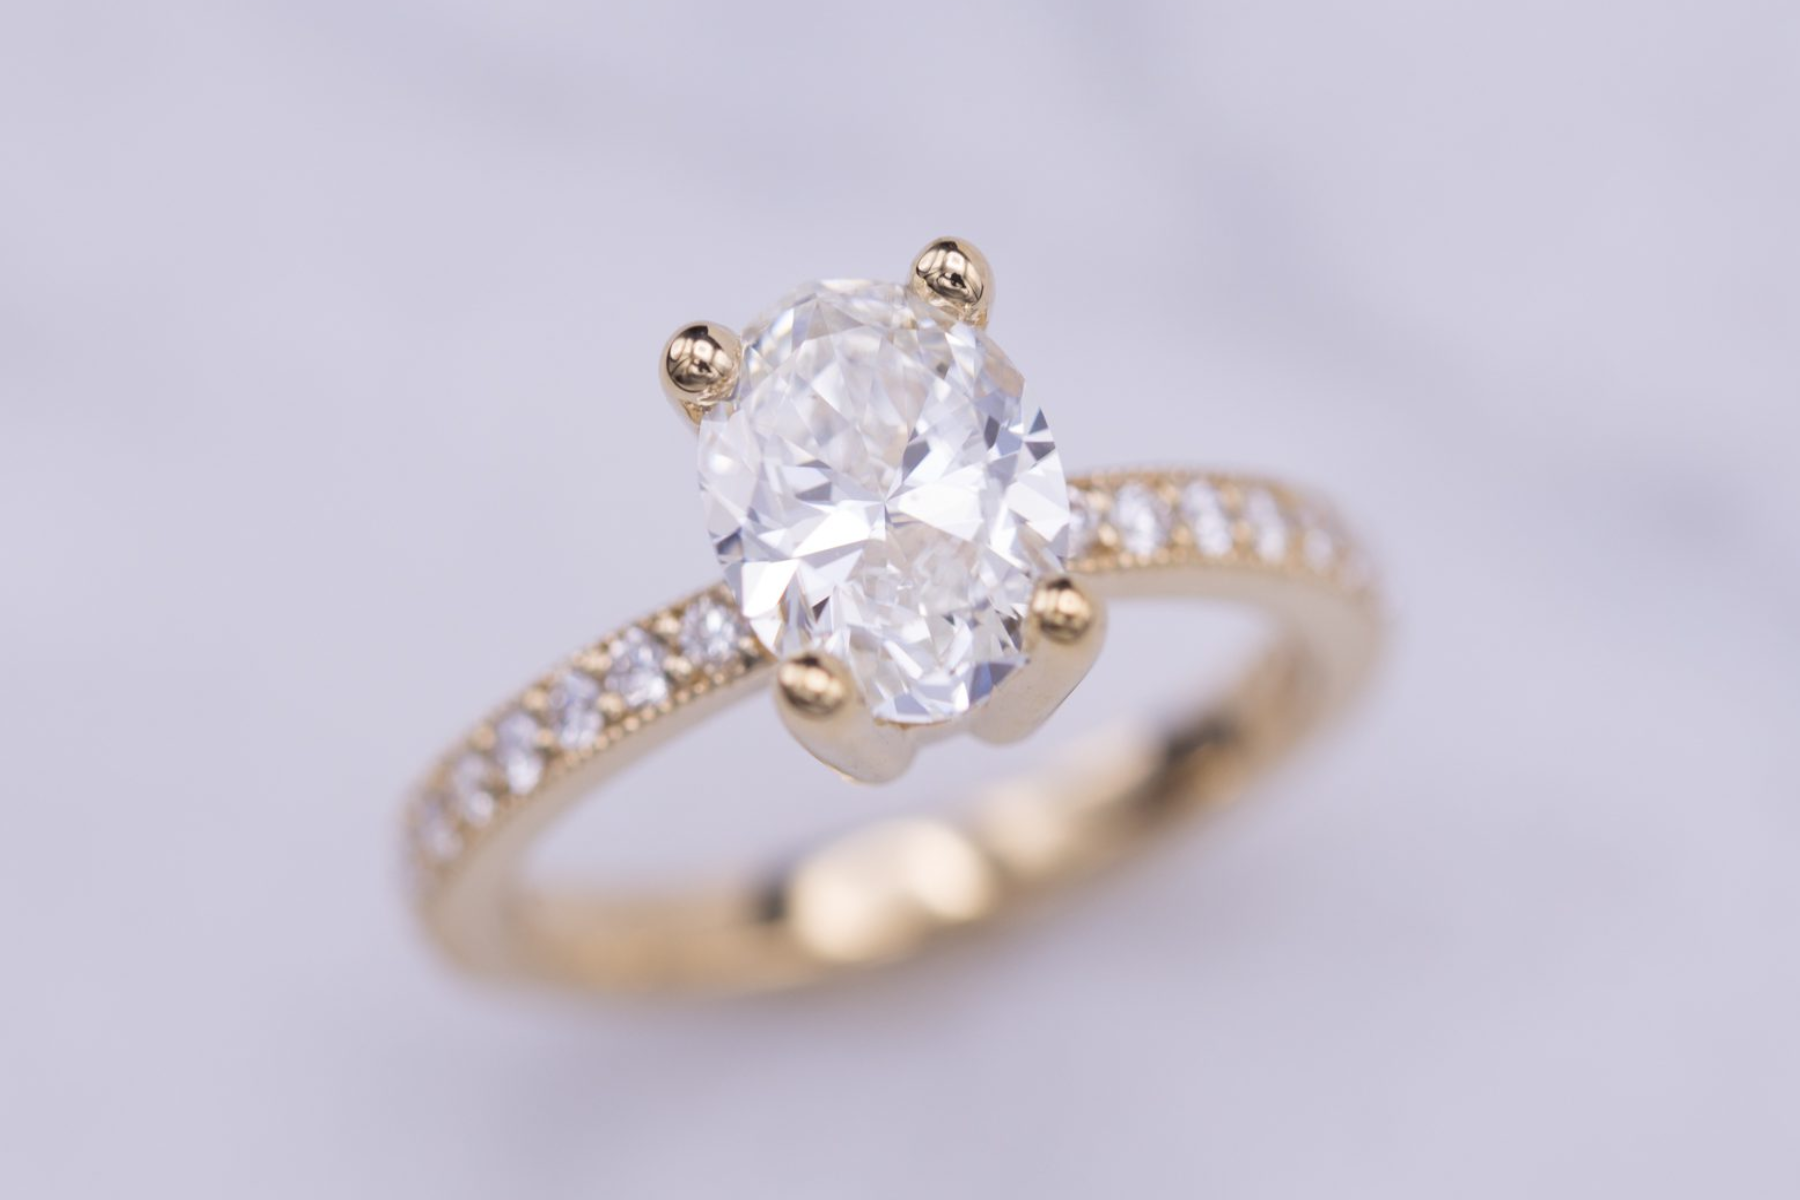 A diamond ring with an oval cut